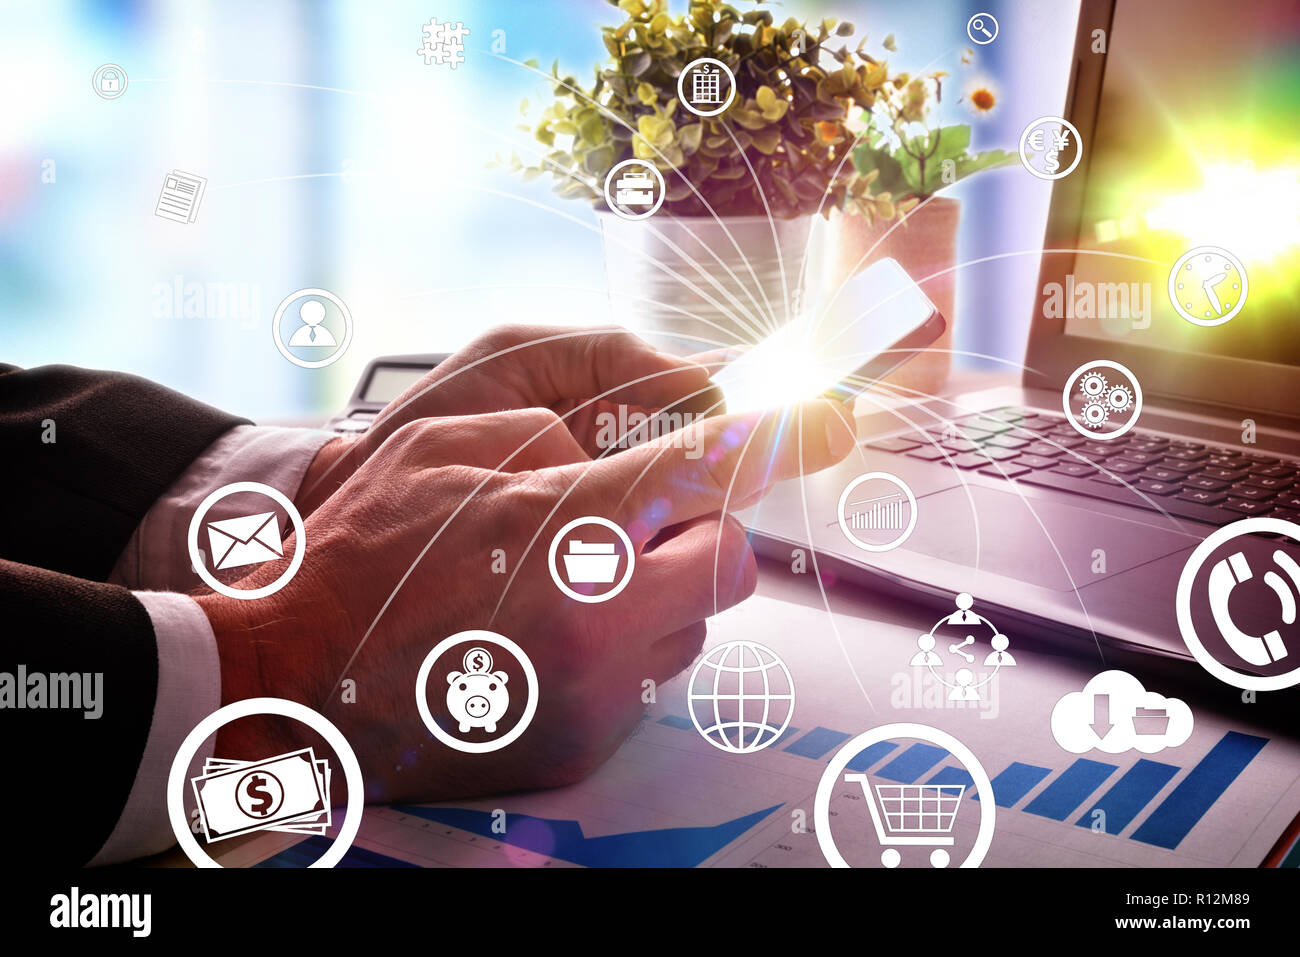 Concept of communication and internet in business with businessman with smartphone in hand at an office table and representative icons. Stock Photo